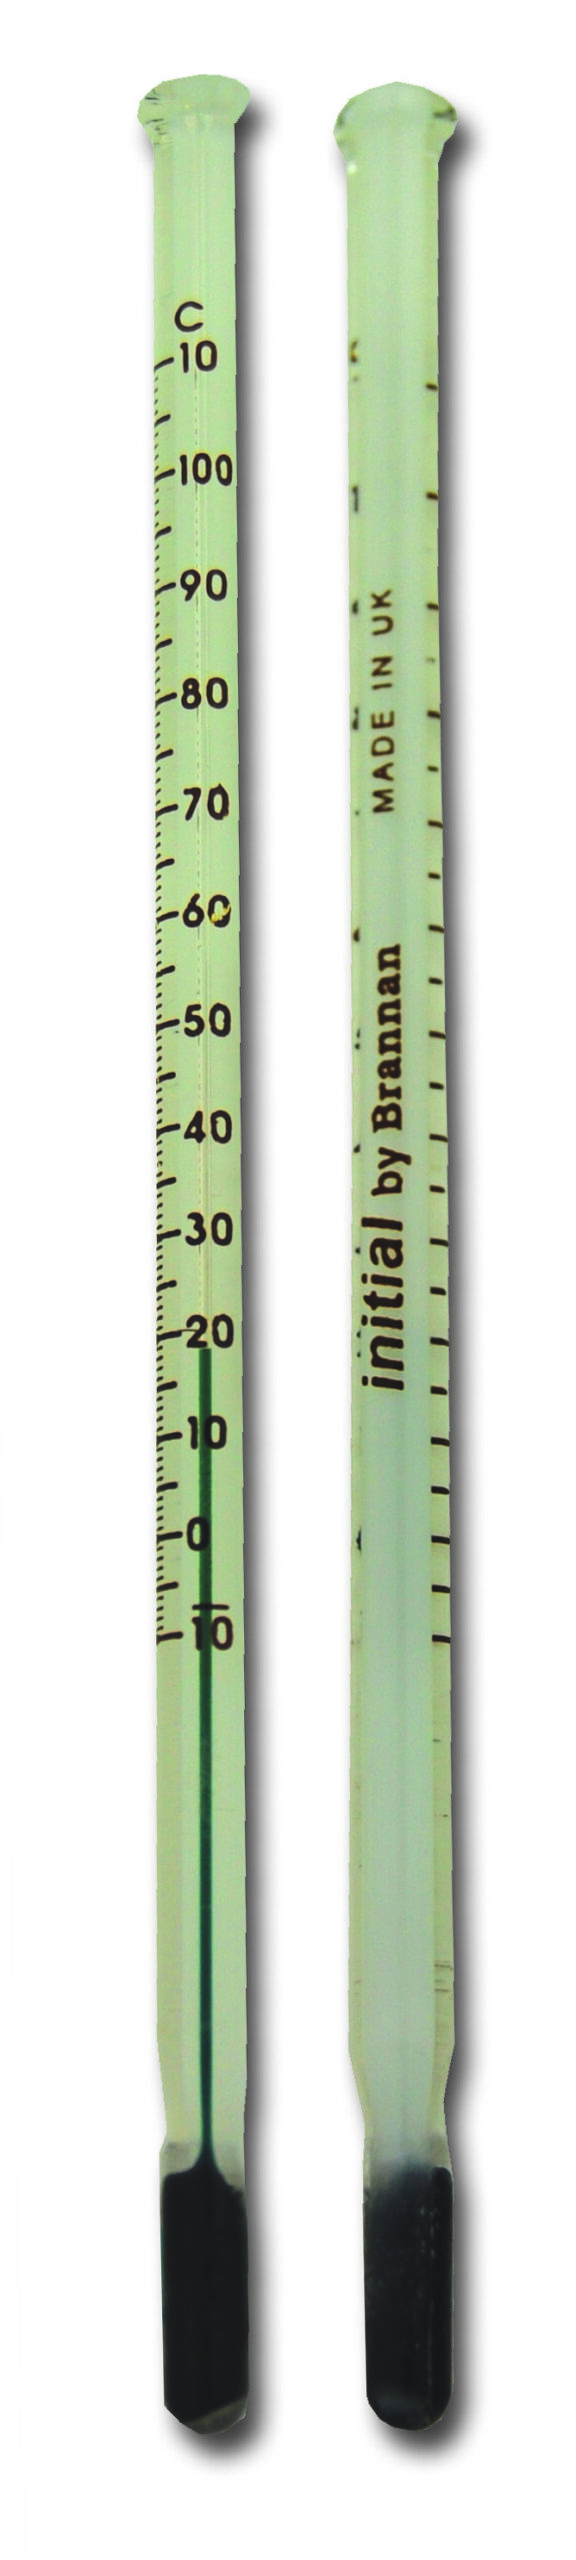 150 mm white/green lab thermometer